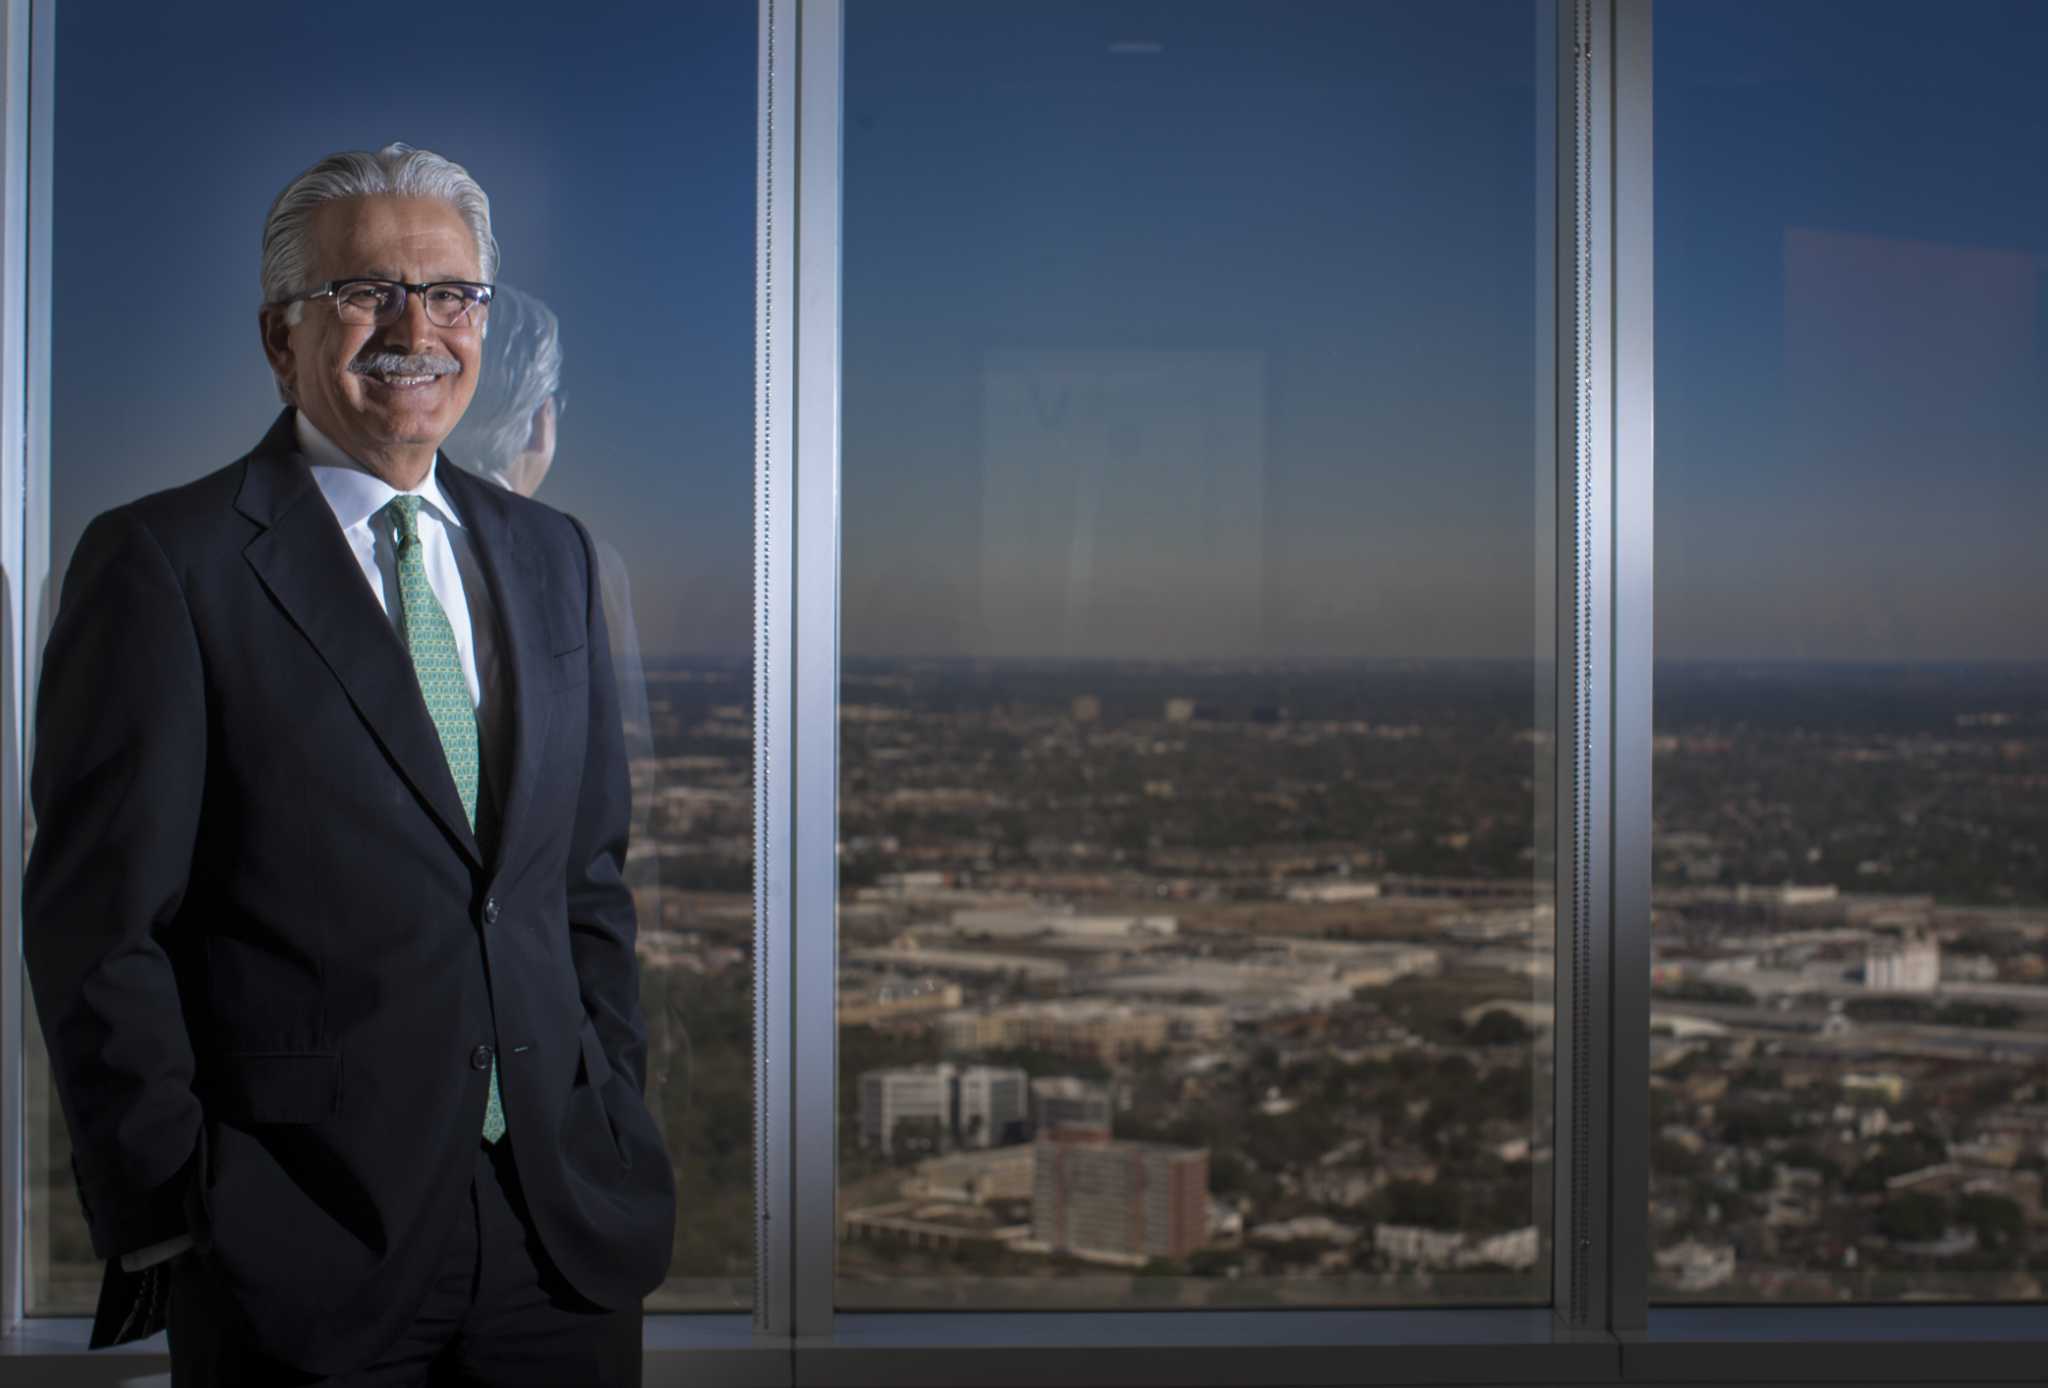 chevron executive ending career that changed corporate philanthropy houstonchronicle com https www houstonchronicle com business energy article chevron executive ending career that changed 11009795 php